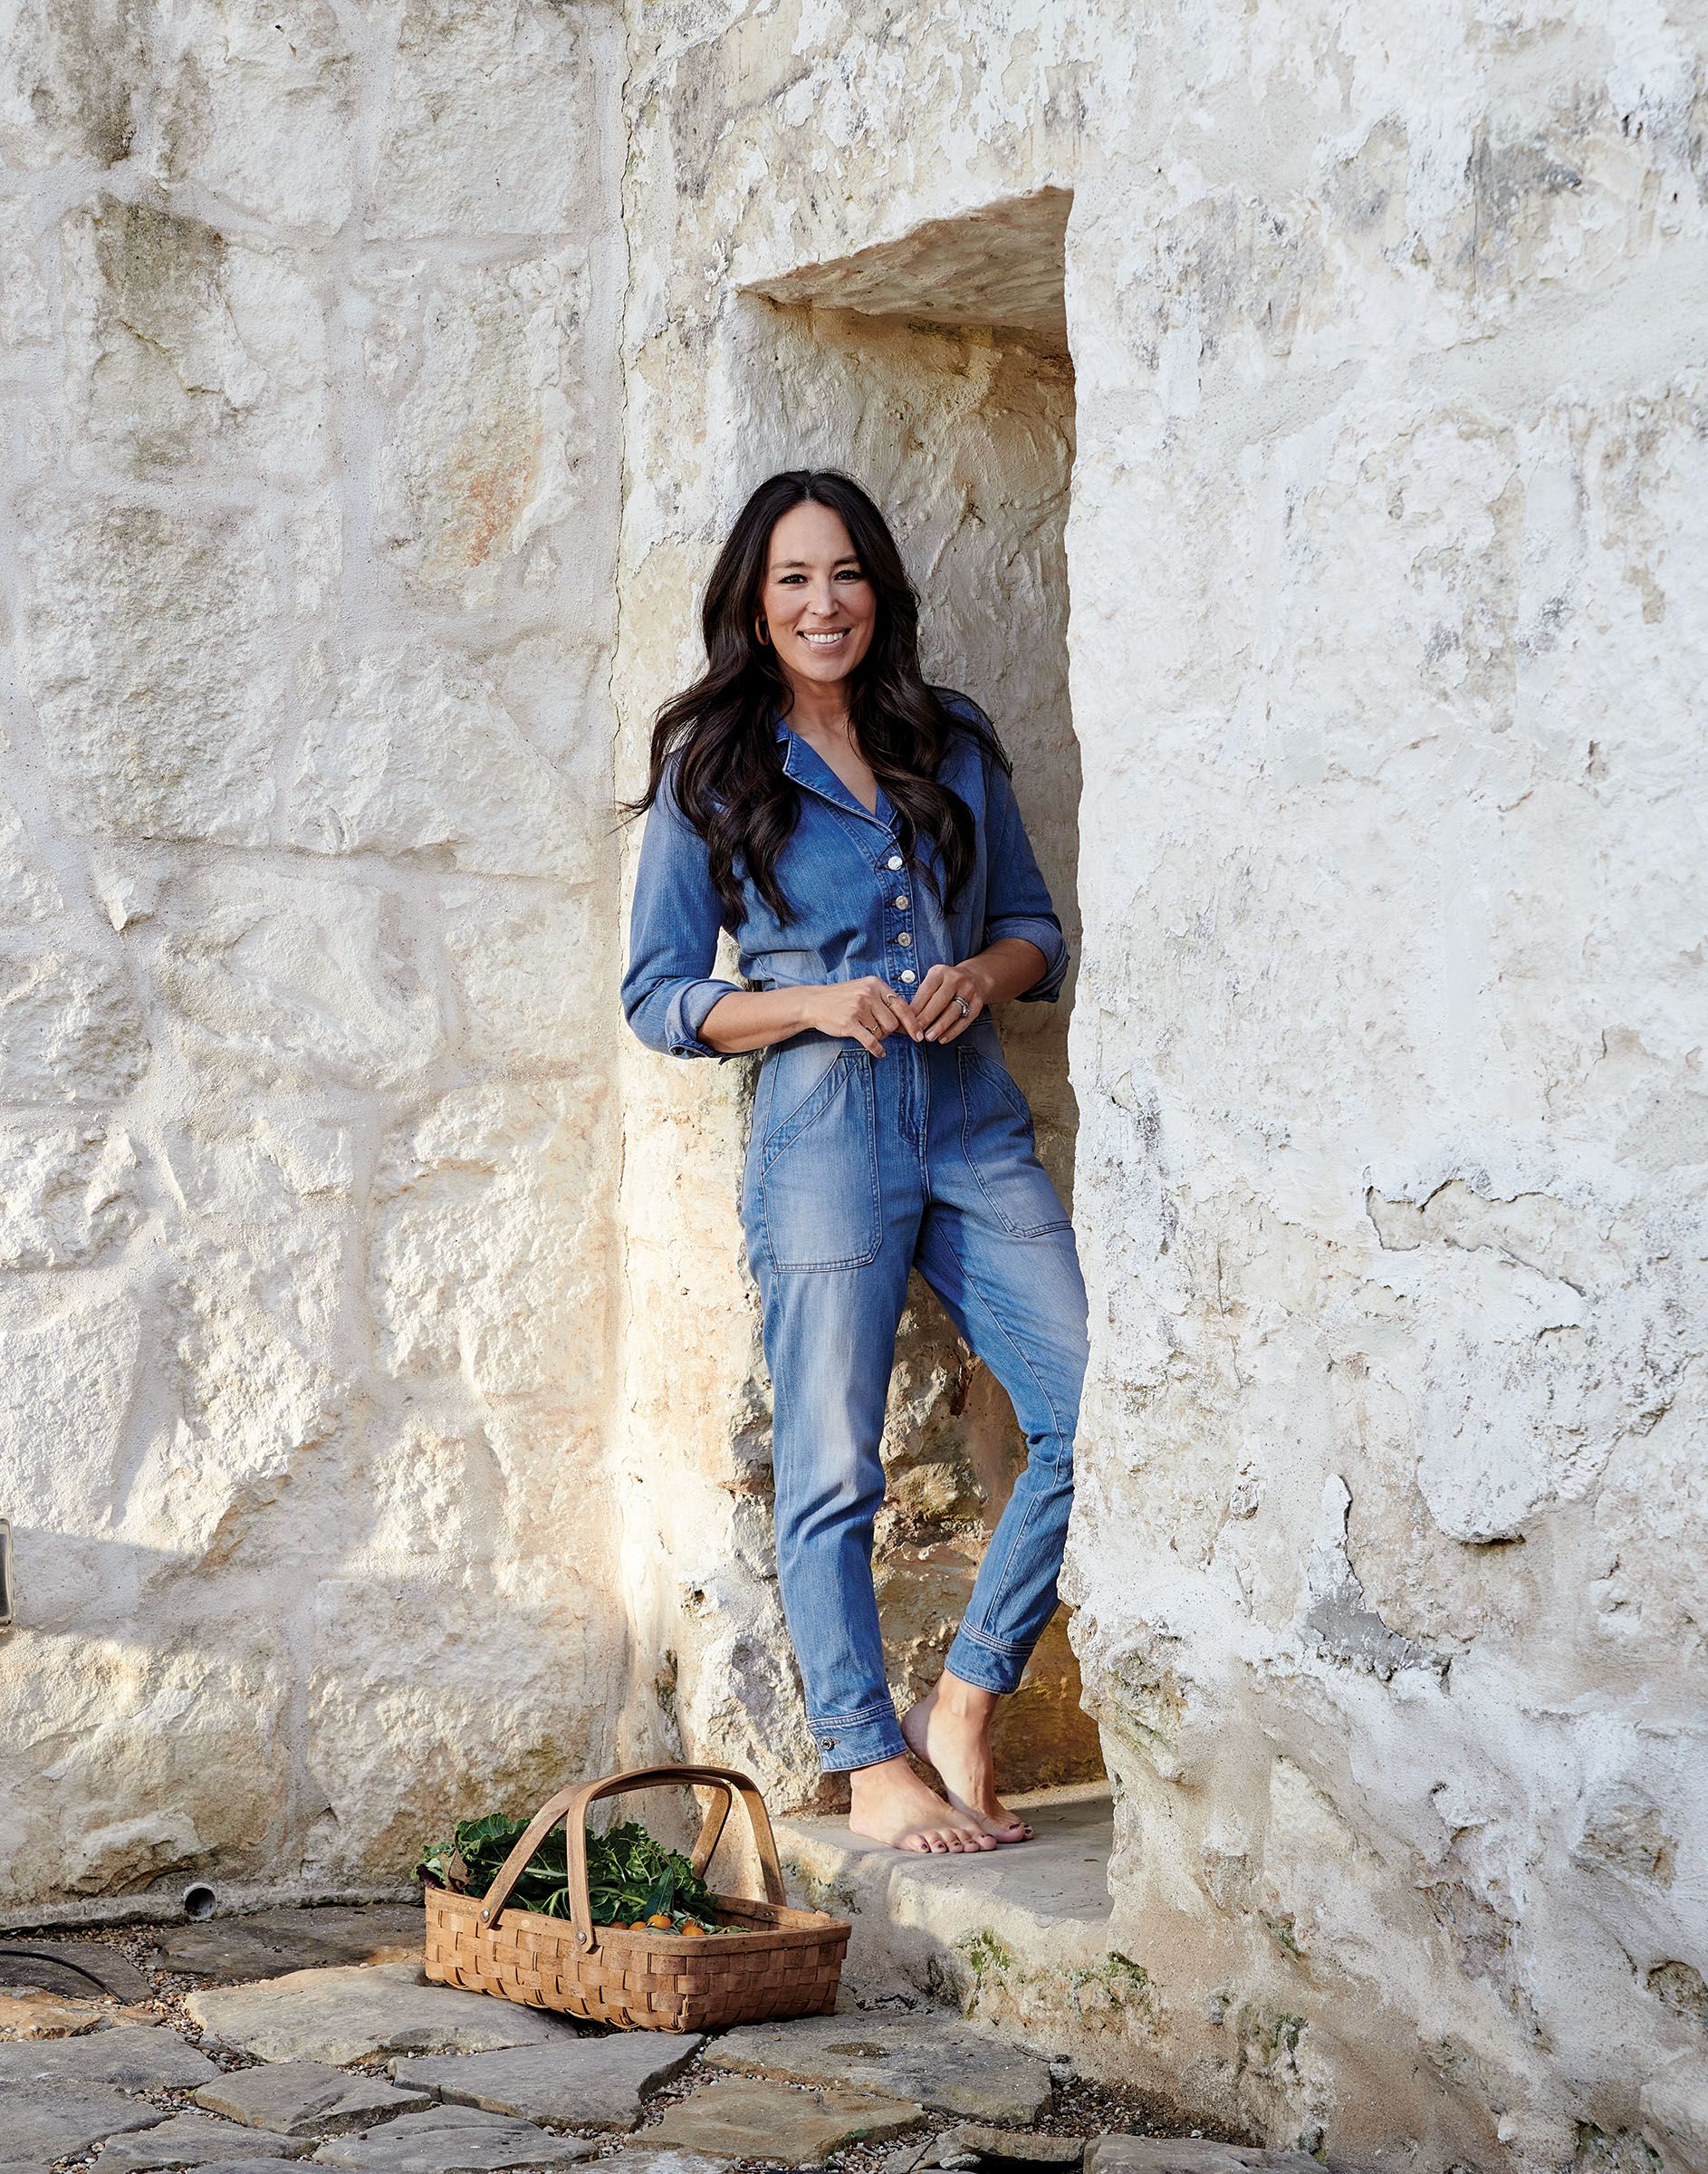 Joanna Gaines's New Cookbook Includes These Three Tasty Recipes